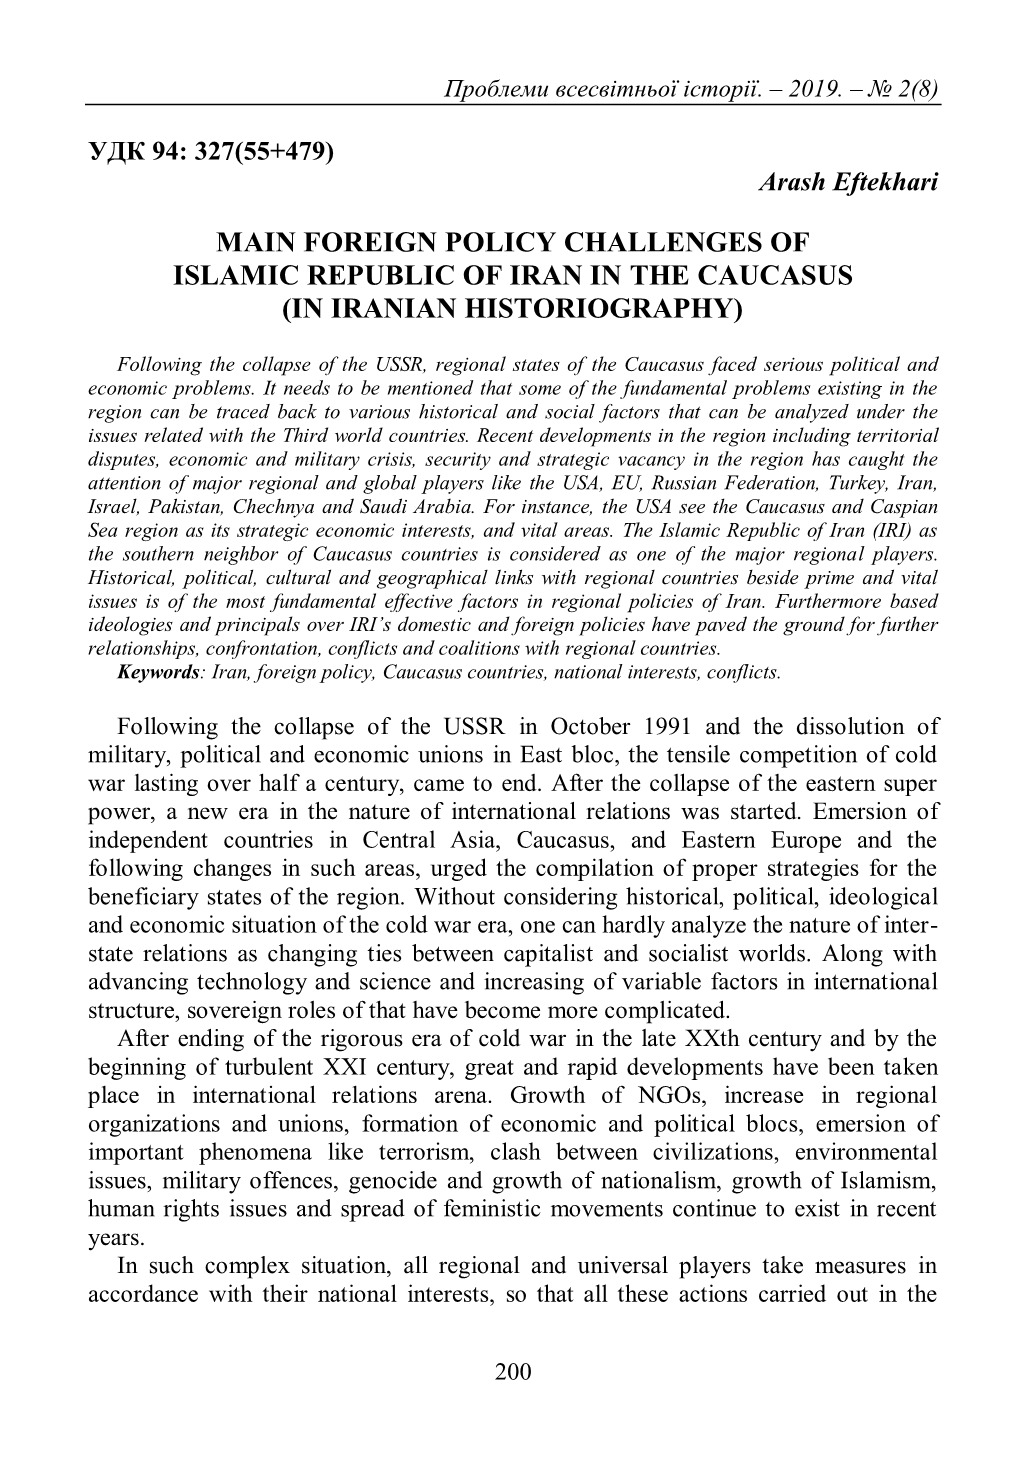 Main Foreign Policy Challenges of Islamic Republic of Iran in the Caucasus (In Iranian Historiography)